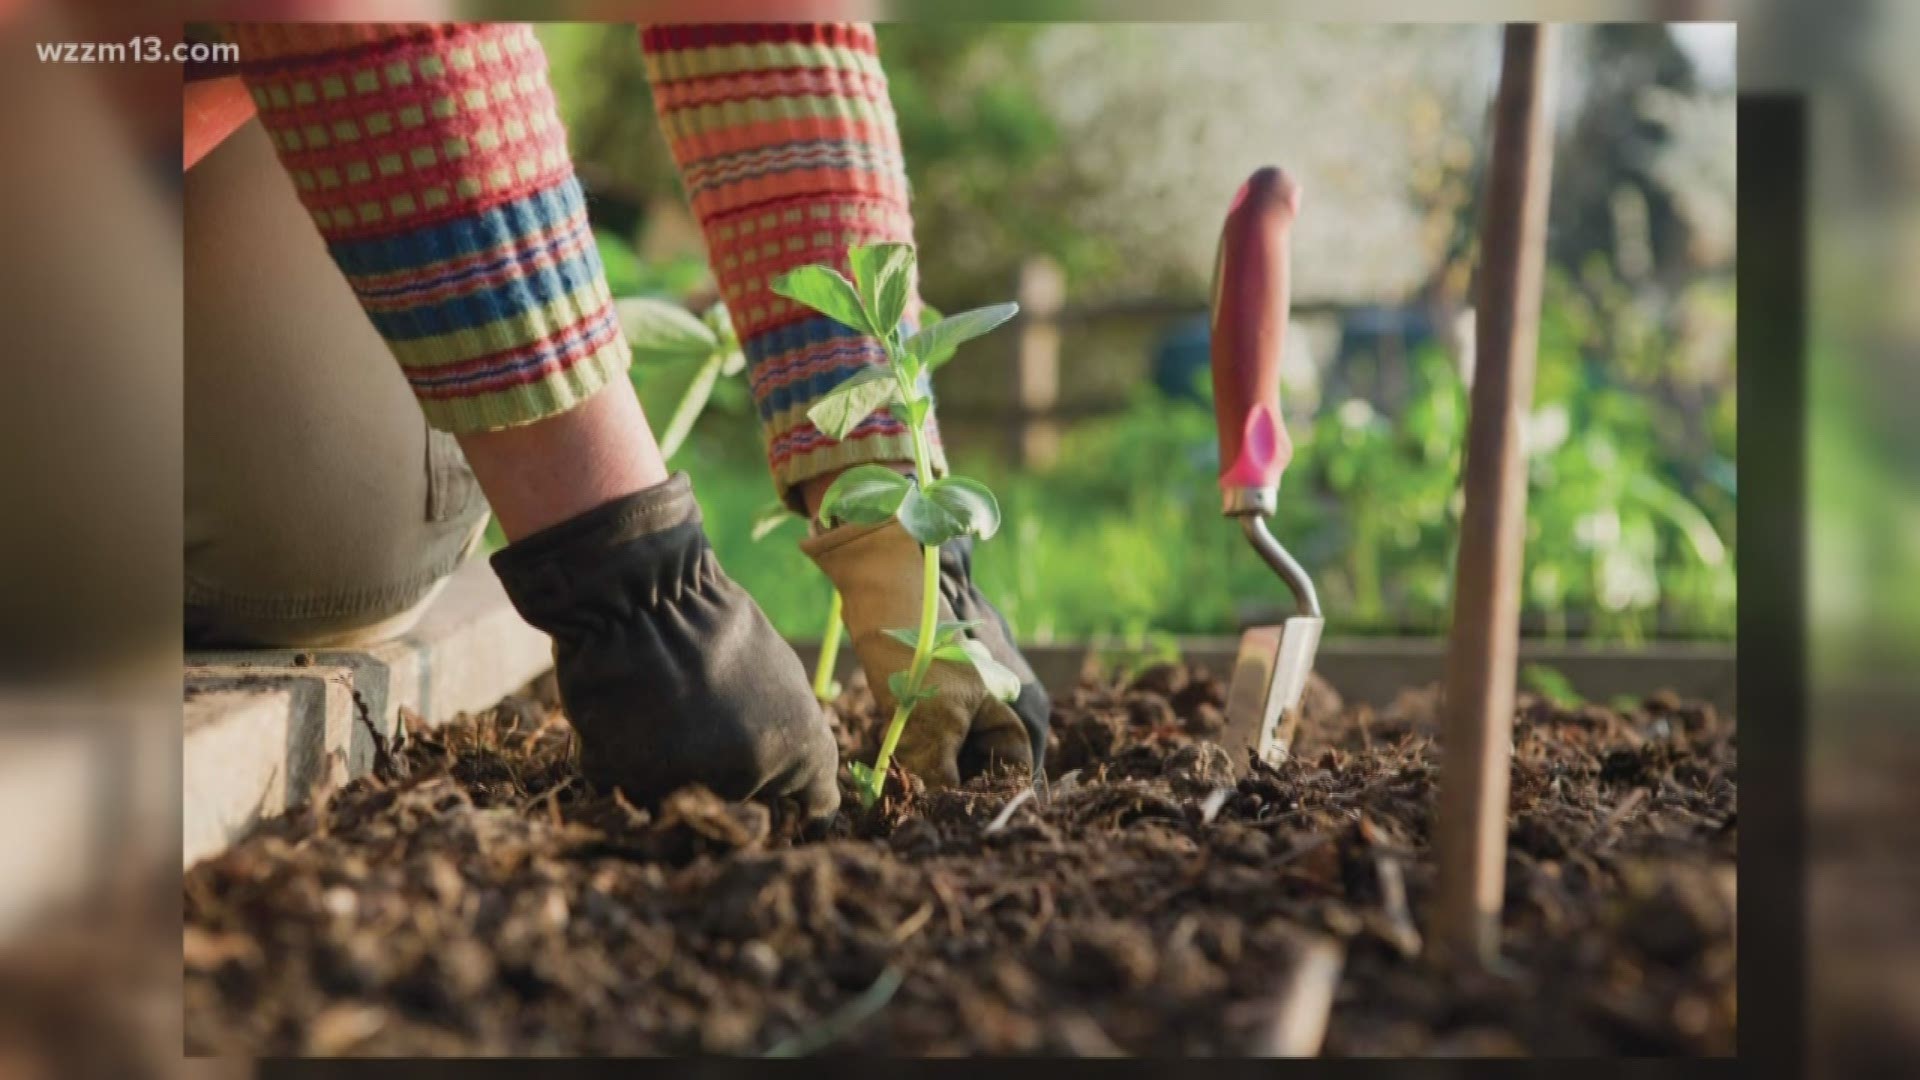 Greenthumb expert Rick Vuyst has some 2019 gardening trends to share.